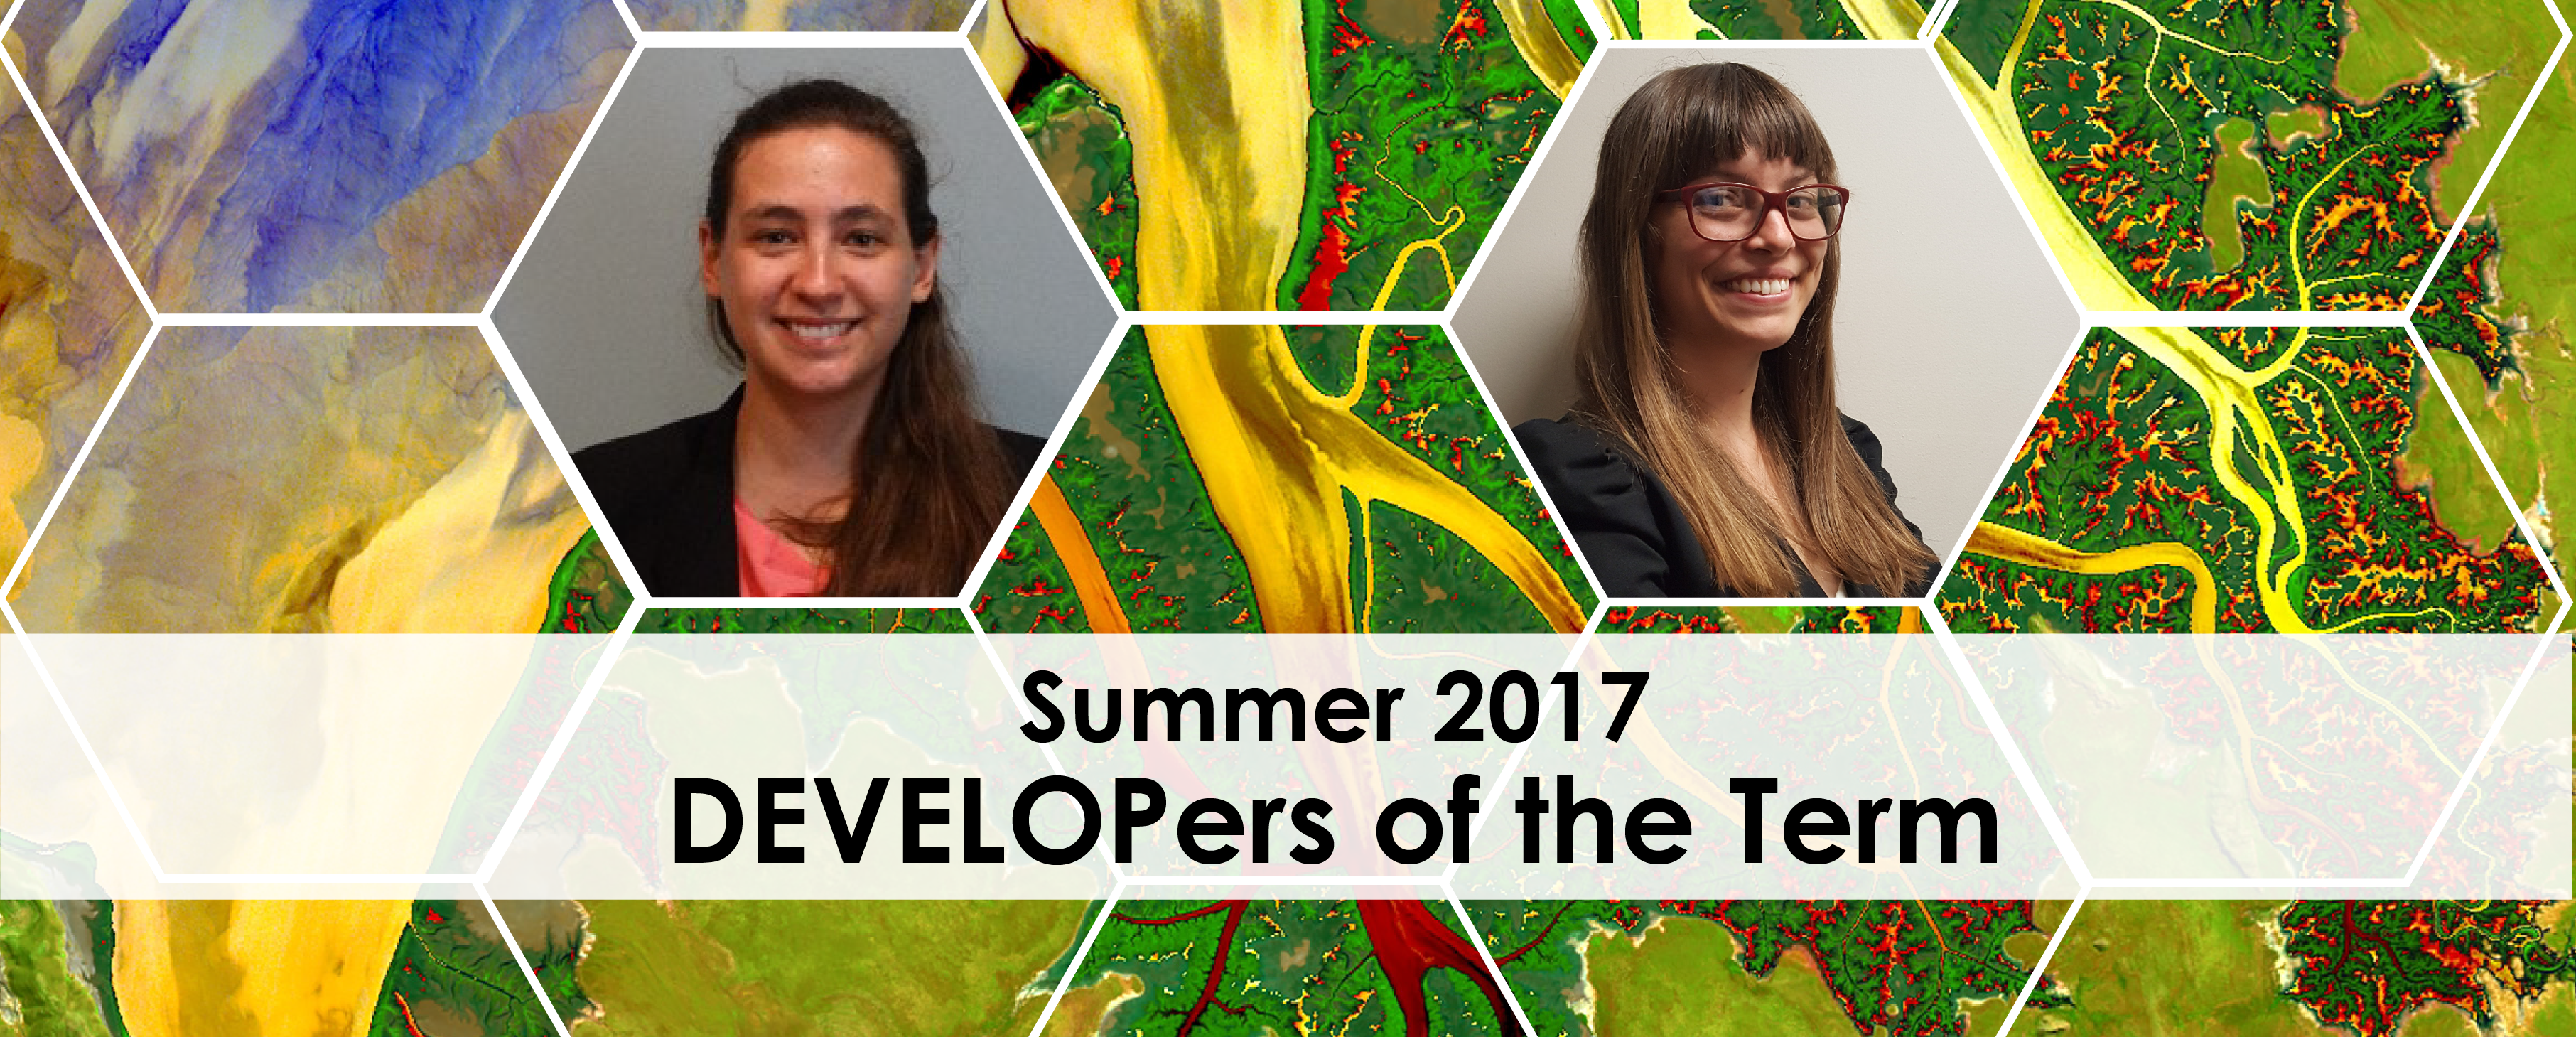 2017 Summer DEVELOPers of the Term